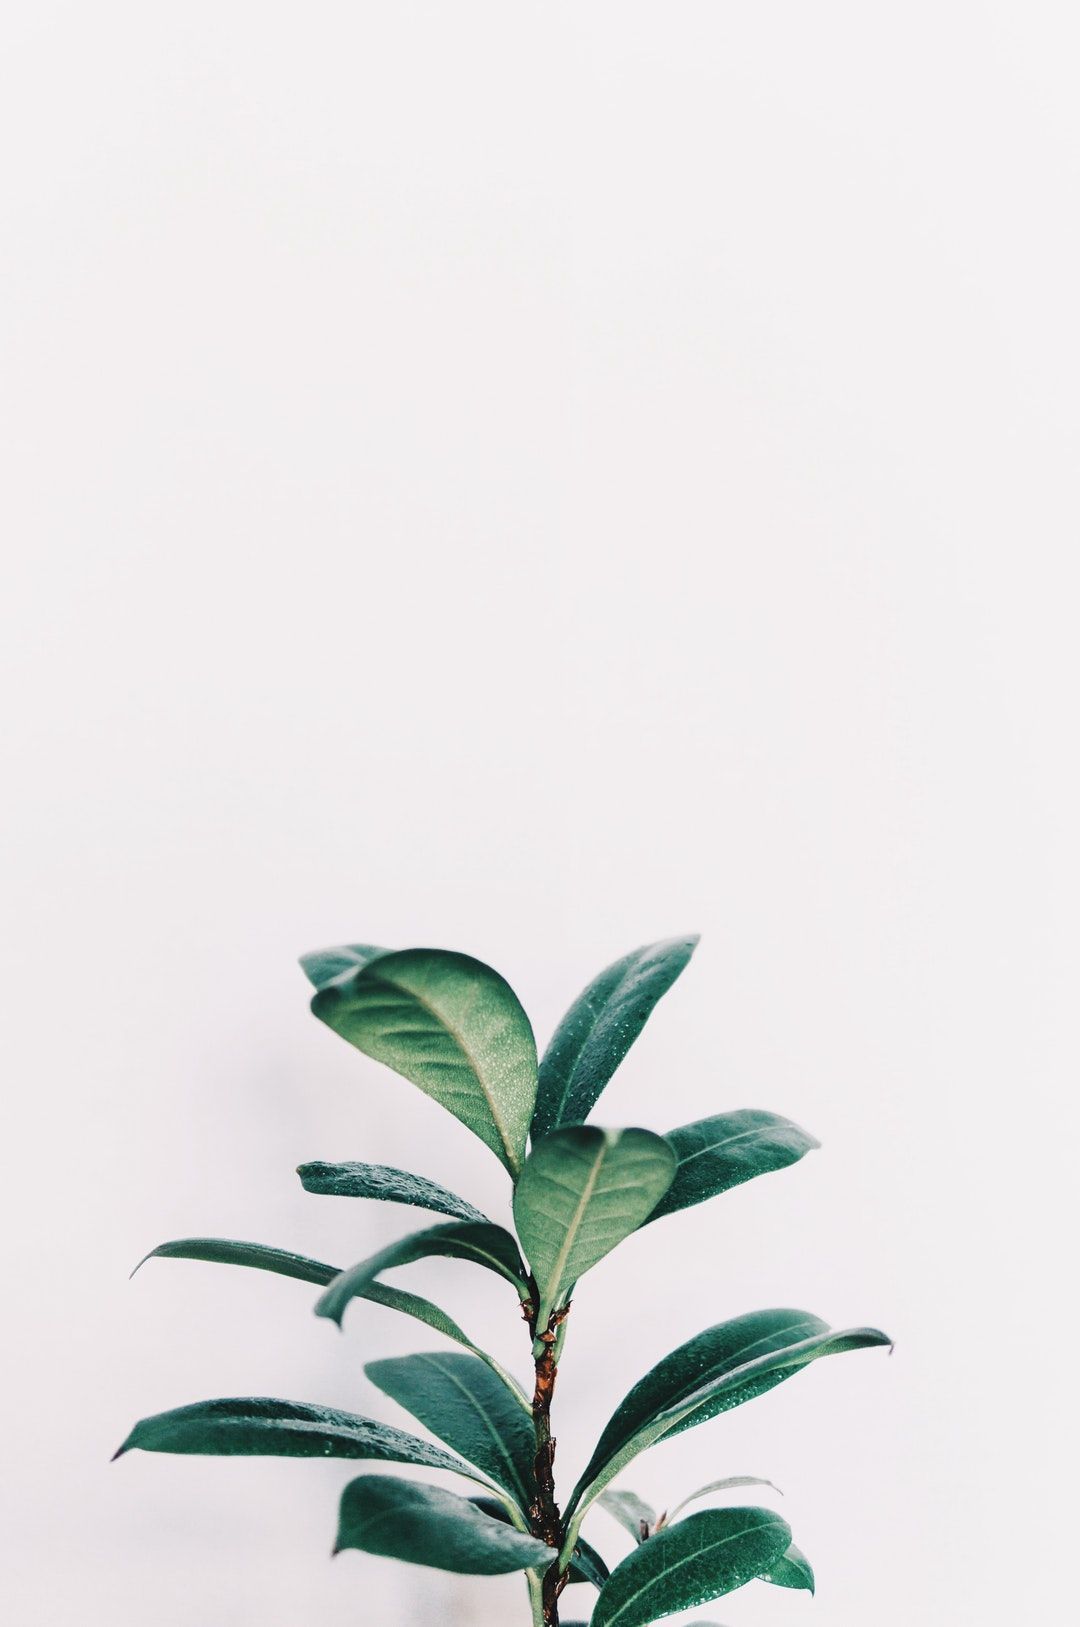 Download this free HD photo of minimal, plant, leaves and green